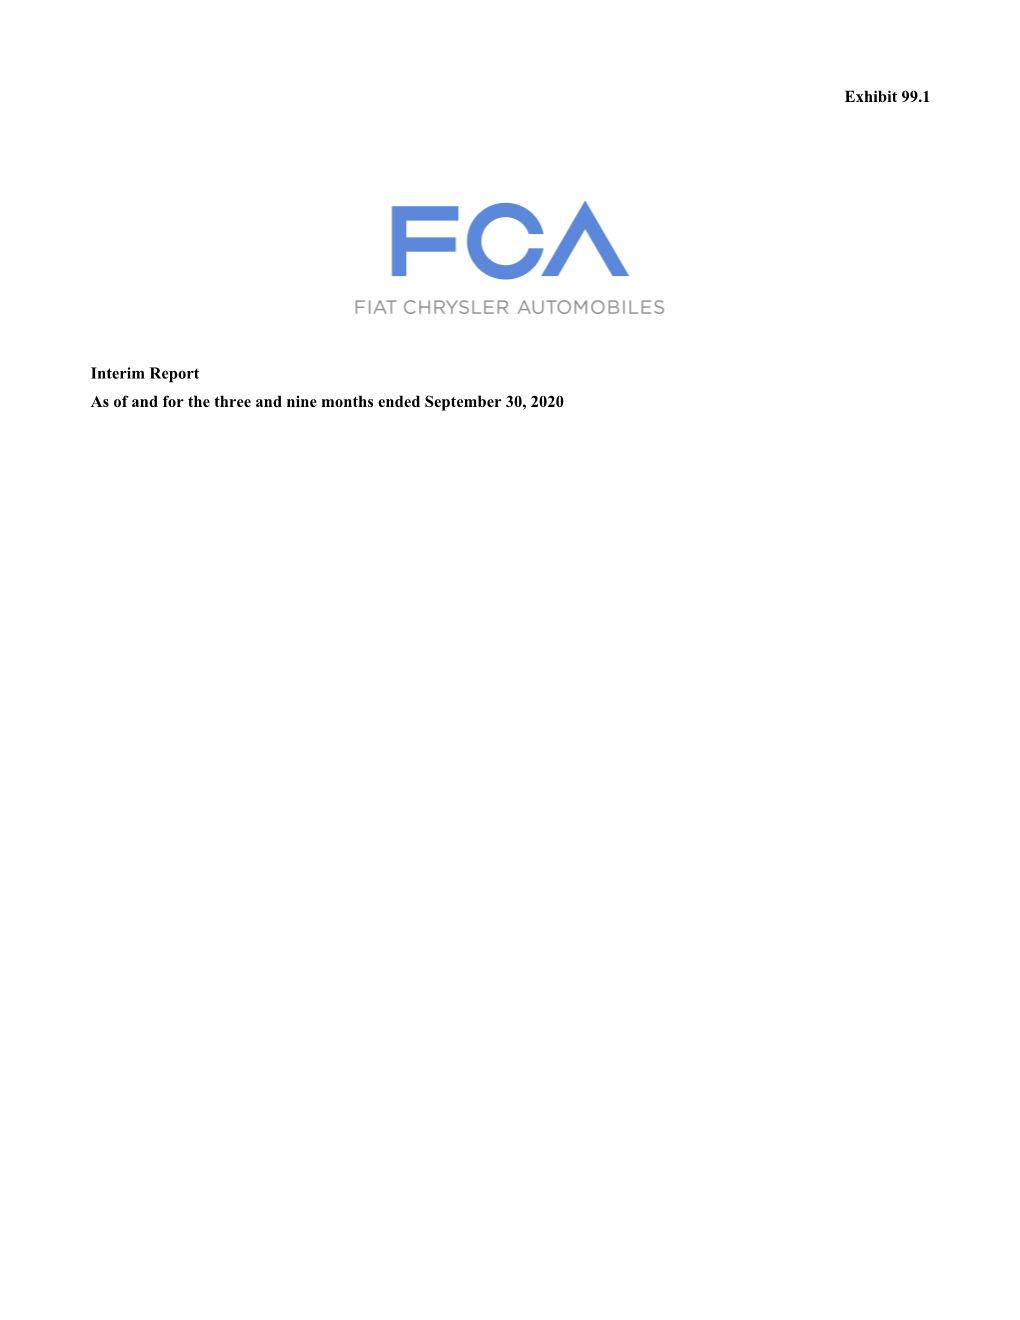 Extract Pages 1-39 and 42-81 of the FCA Q3 2020 Interim Report